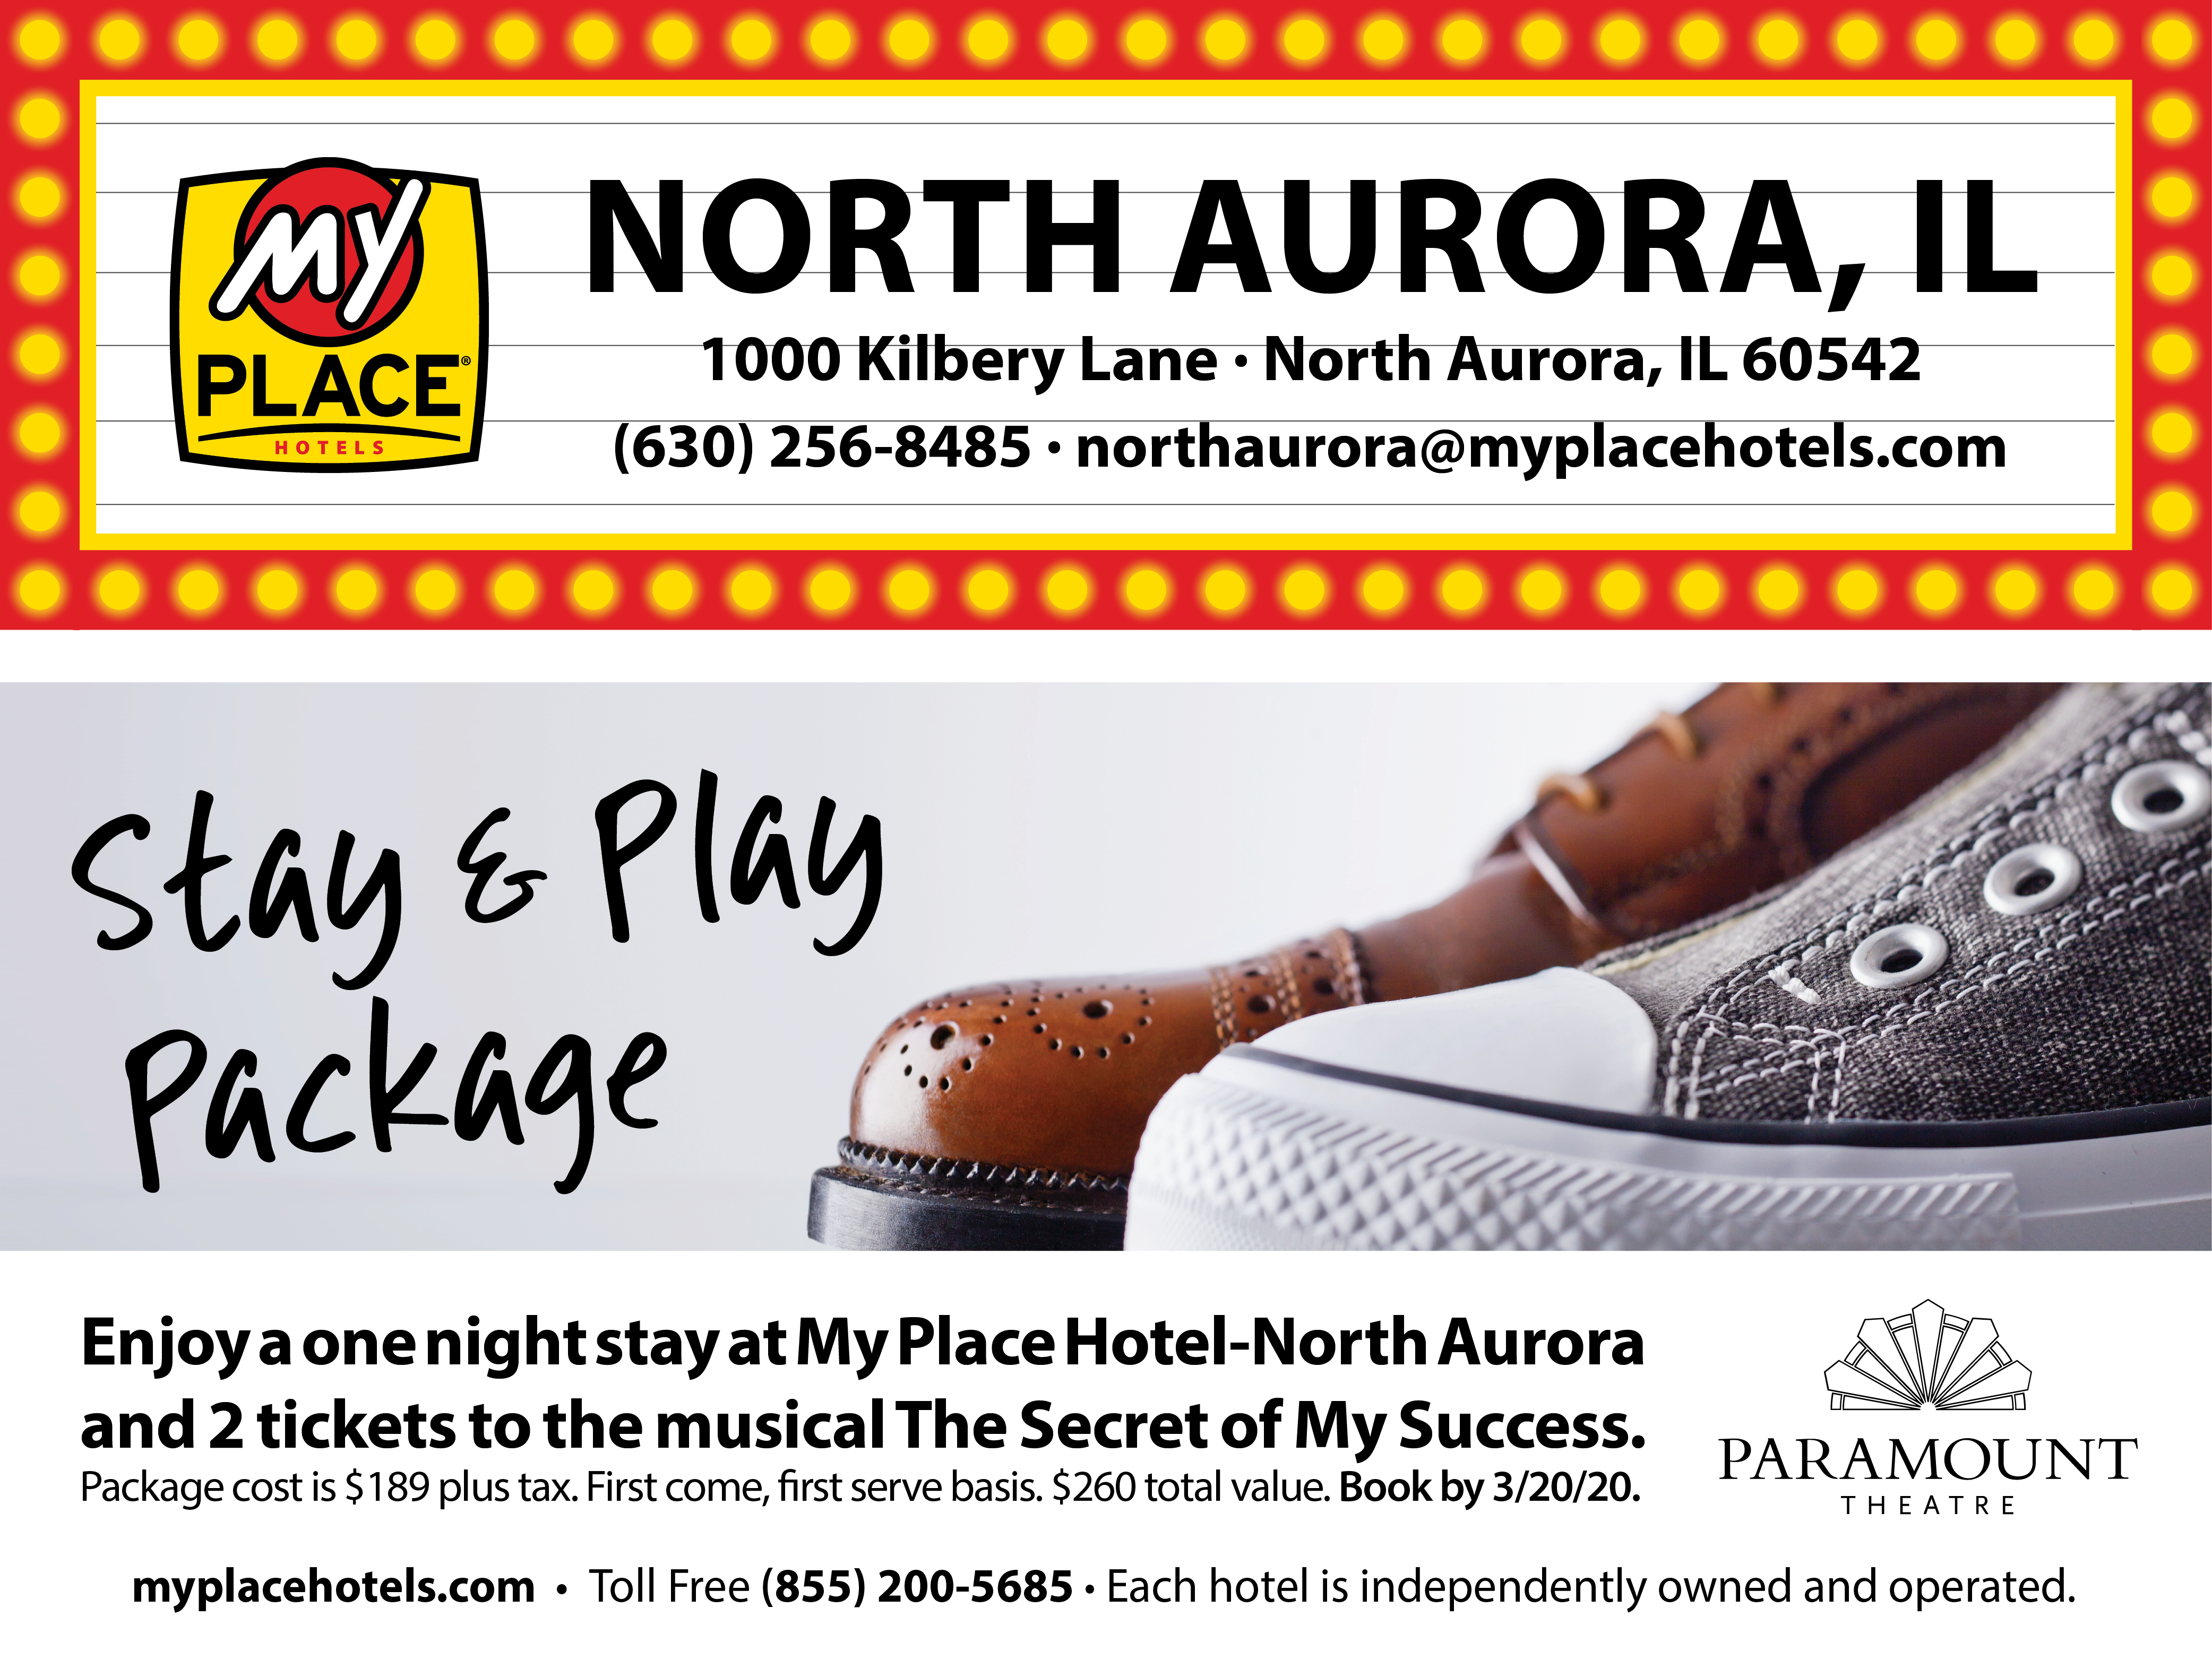 Theater + Stay Package at My Place Hotels - N. Aurora